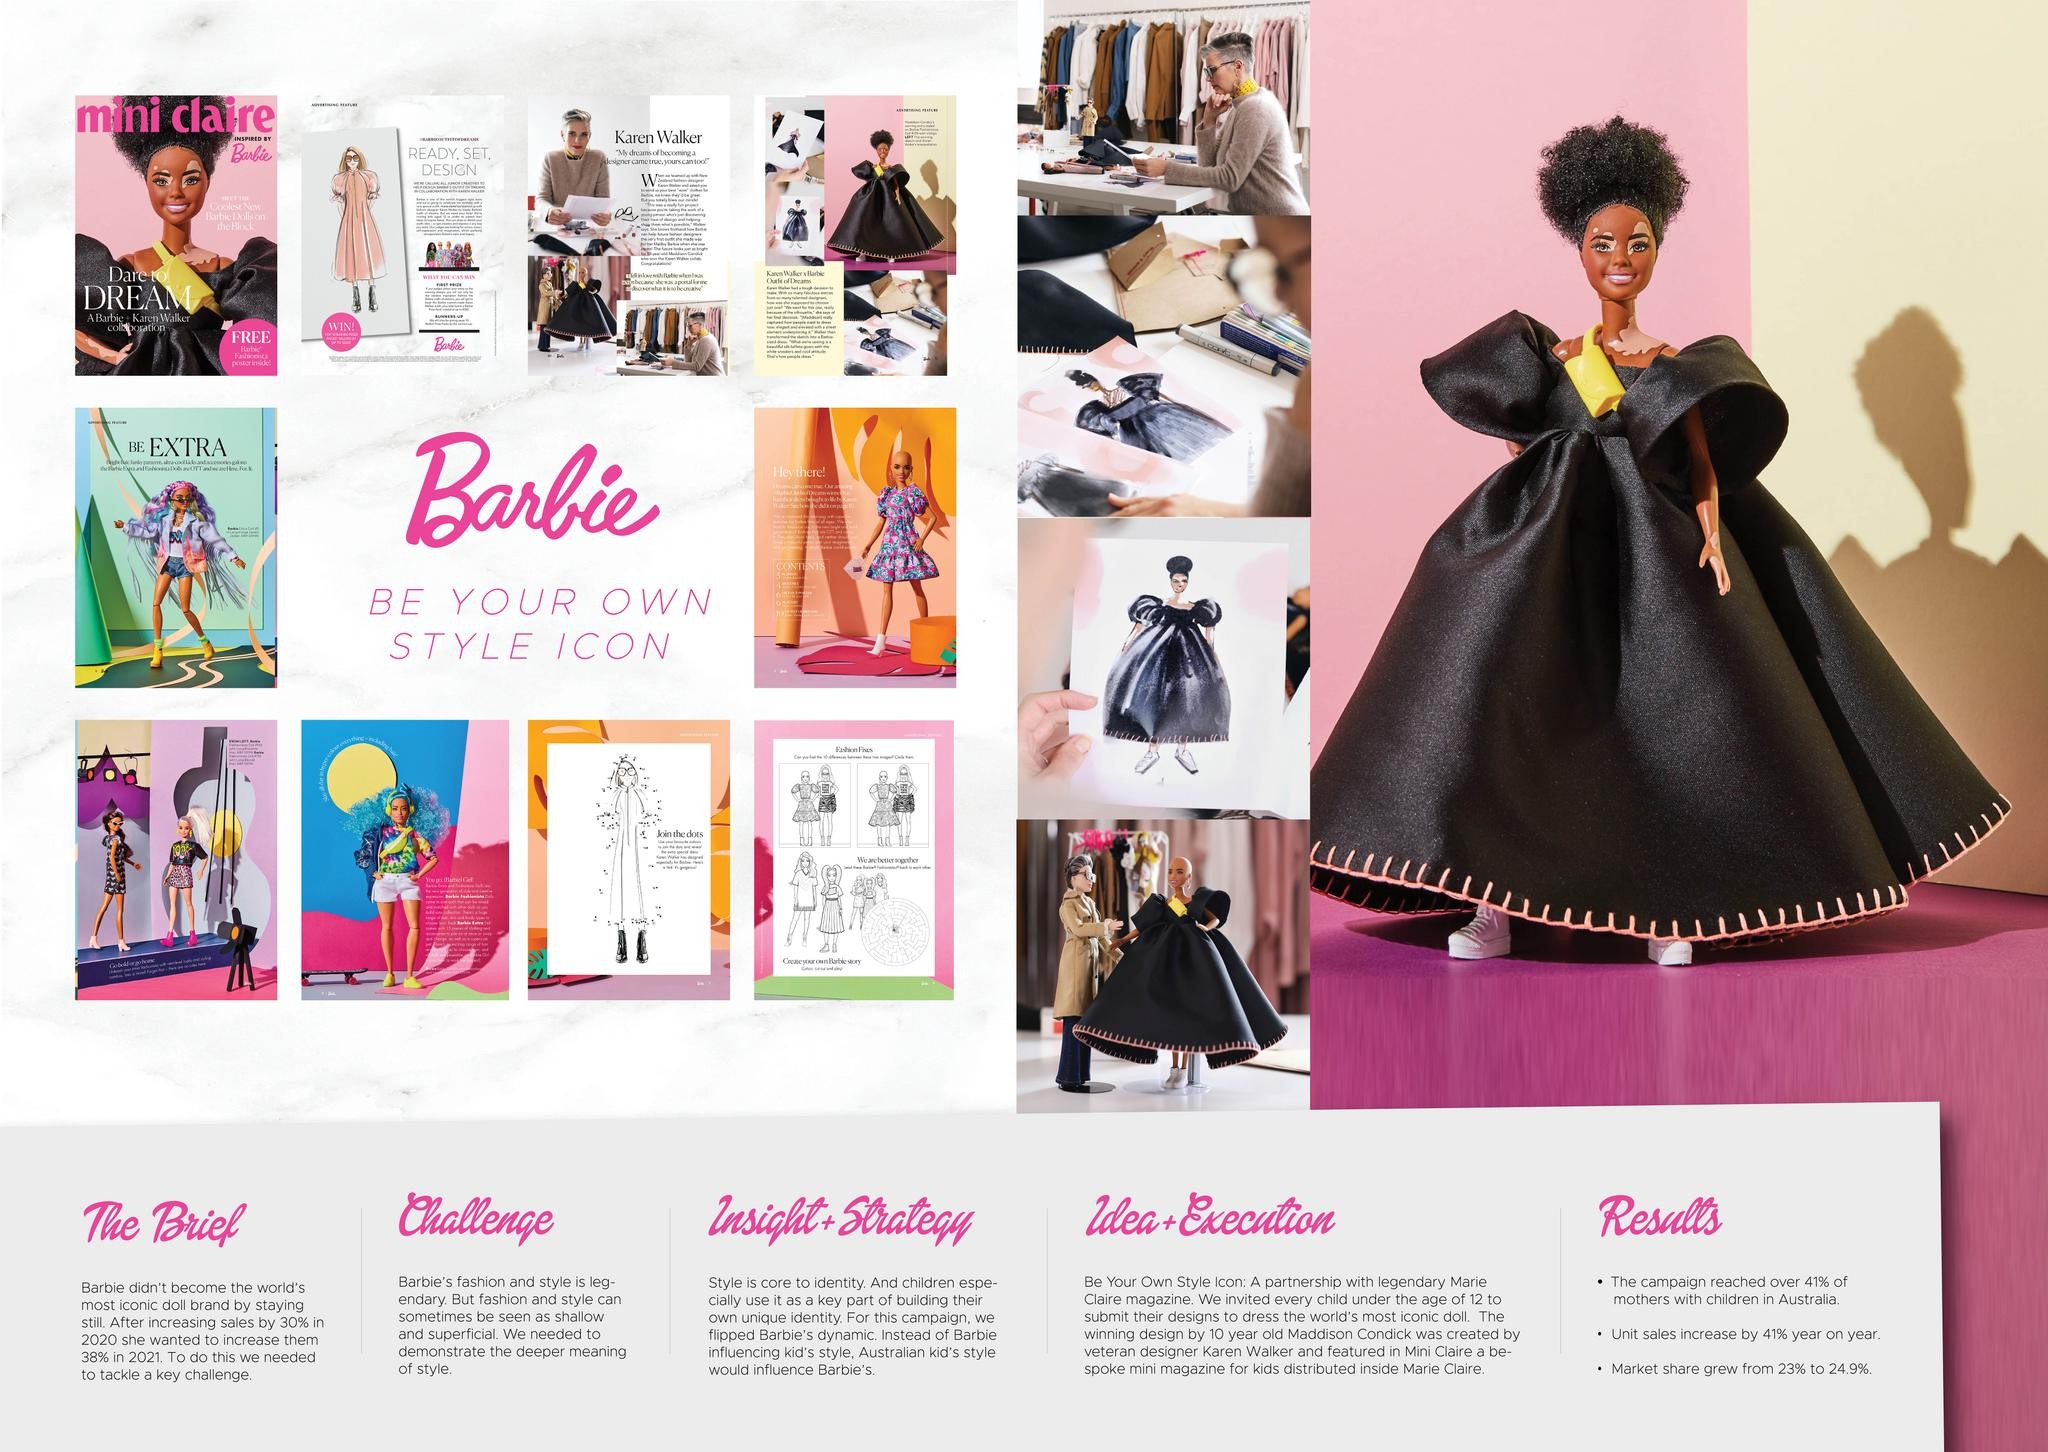 Barbie: Be Your Own Style Icon